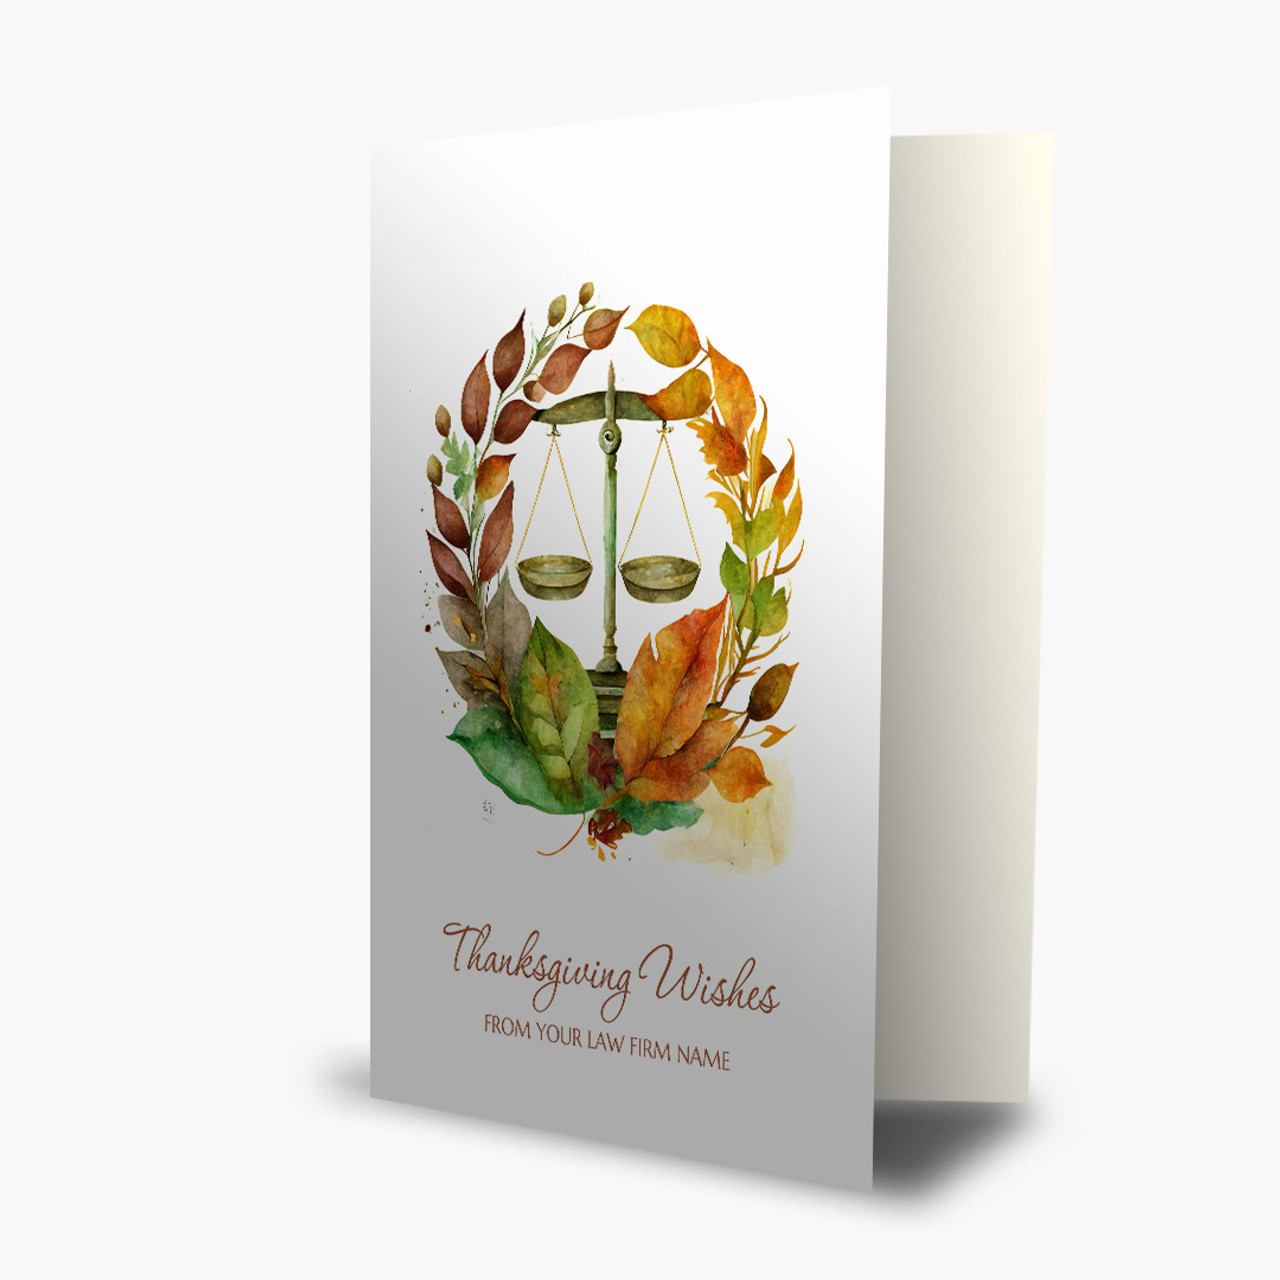 Autumn Wreath of Justice Thanksgiving Card